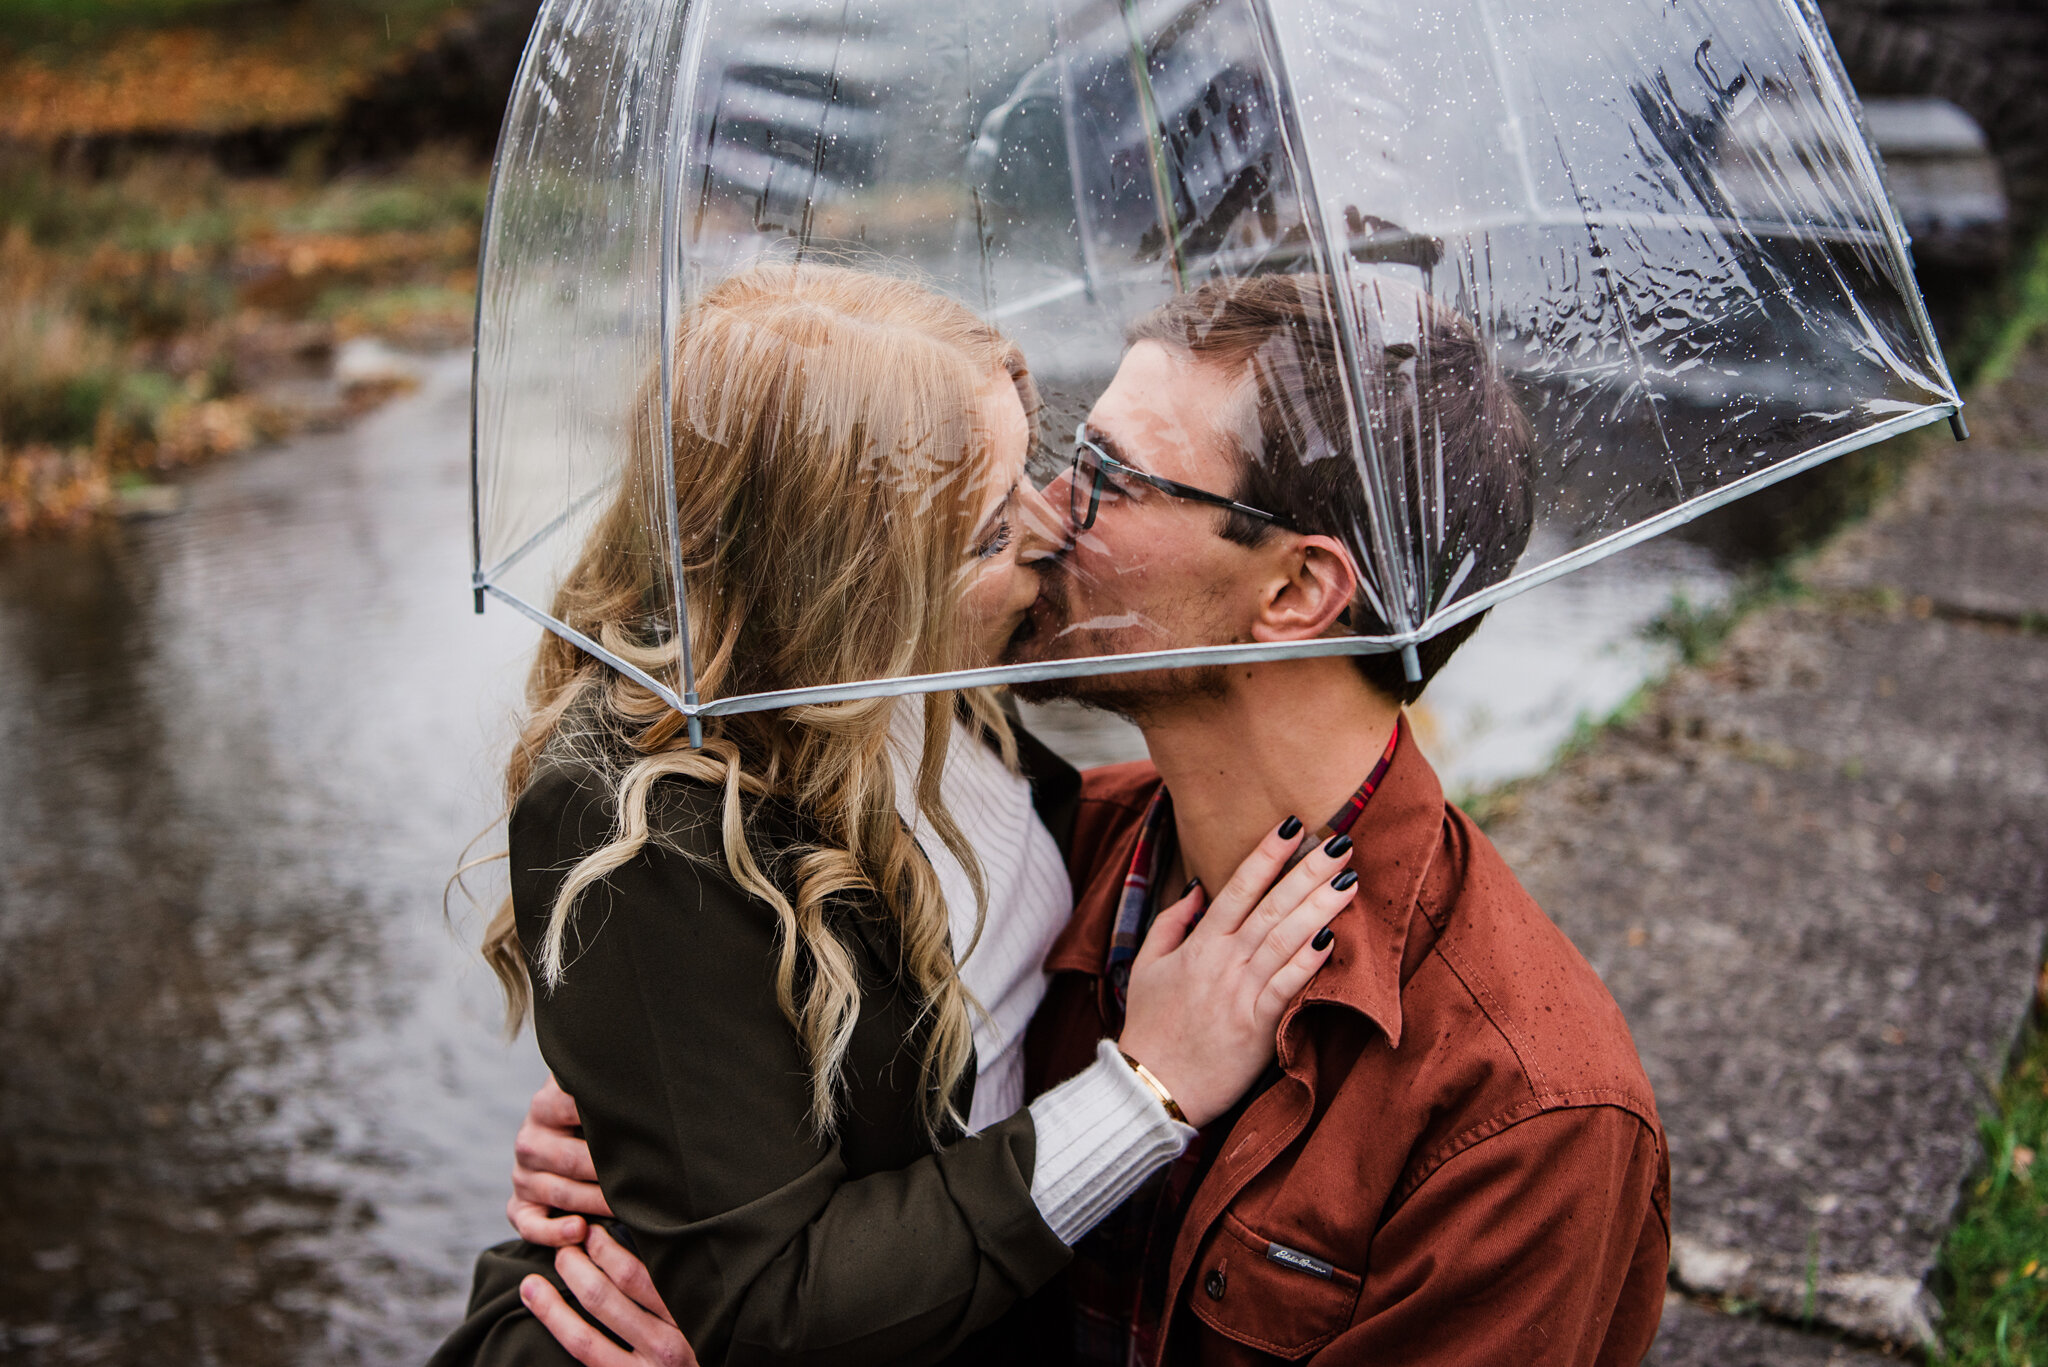 Forest_Lawn_Cemetery_Albright_Knox_Art_Gallery_Buffalo_Engagement_Session_JILL_STUDIO_Rochester_NY_Photographer_1182.jpg